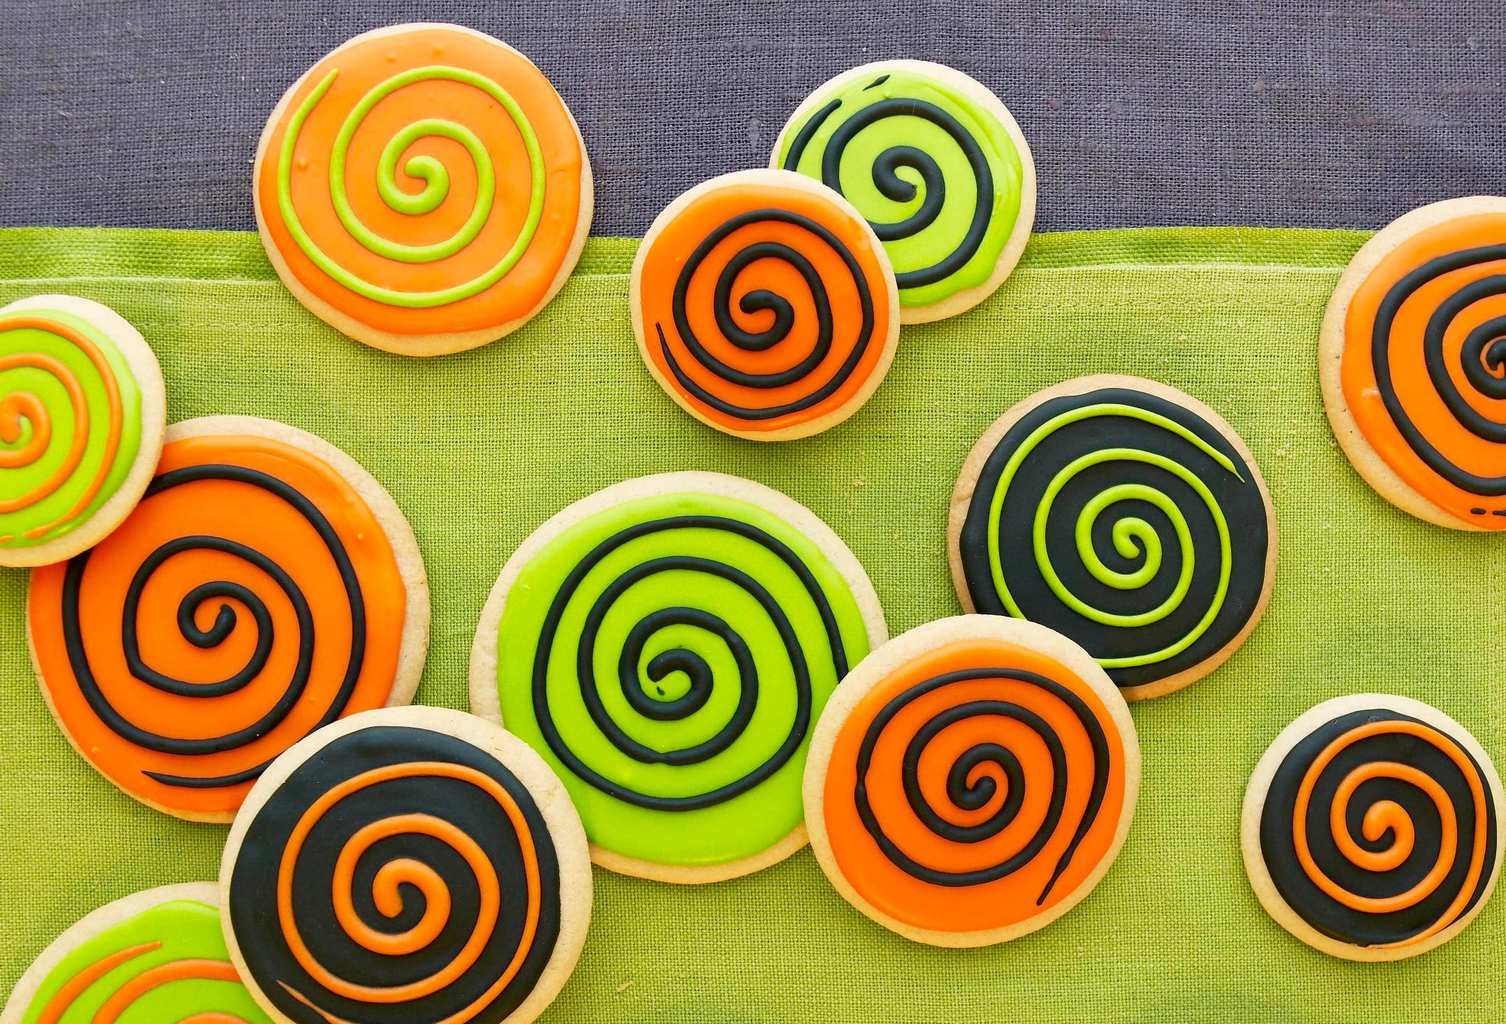 Spooky Spiral Halloween Cookies are the ultimate psychedelic treat!